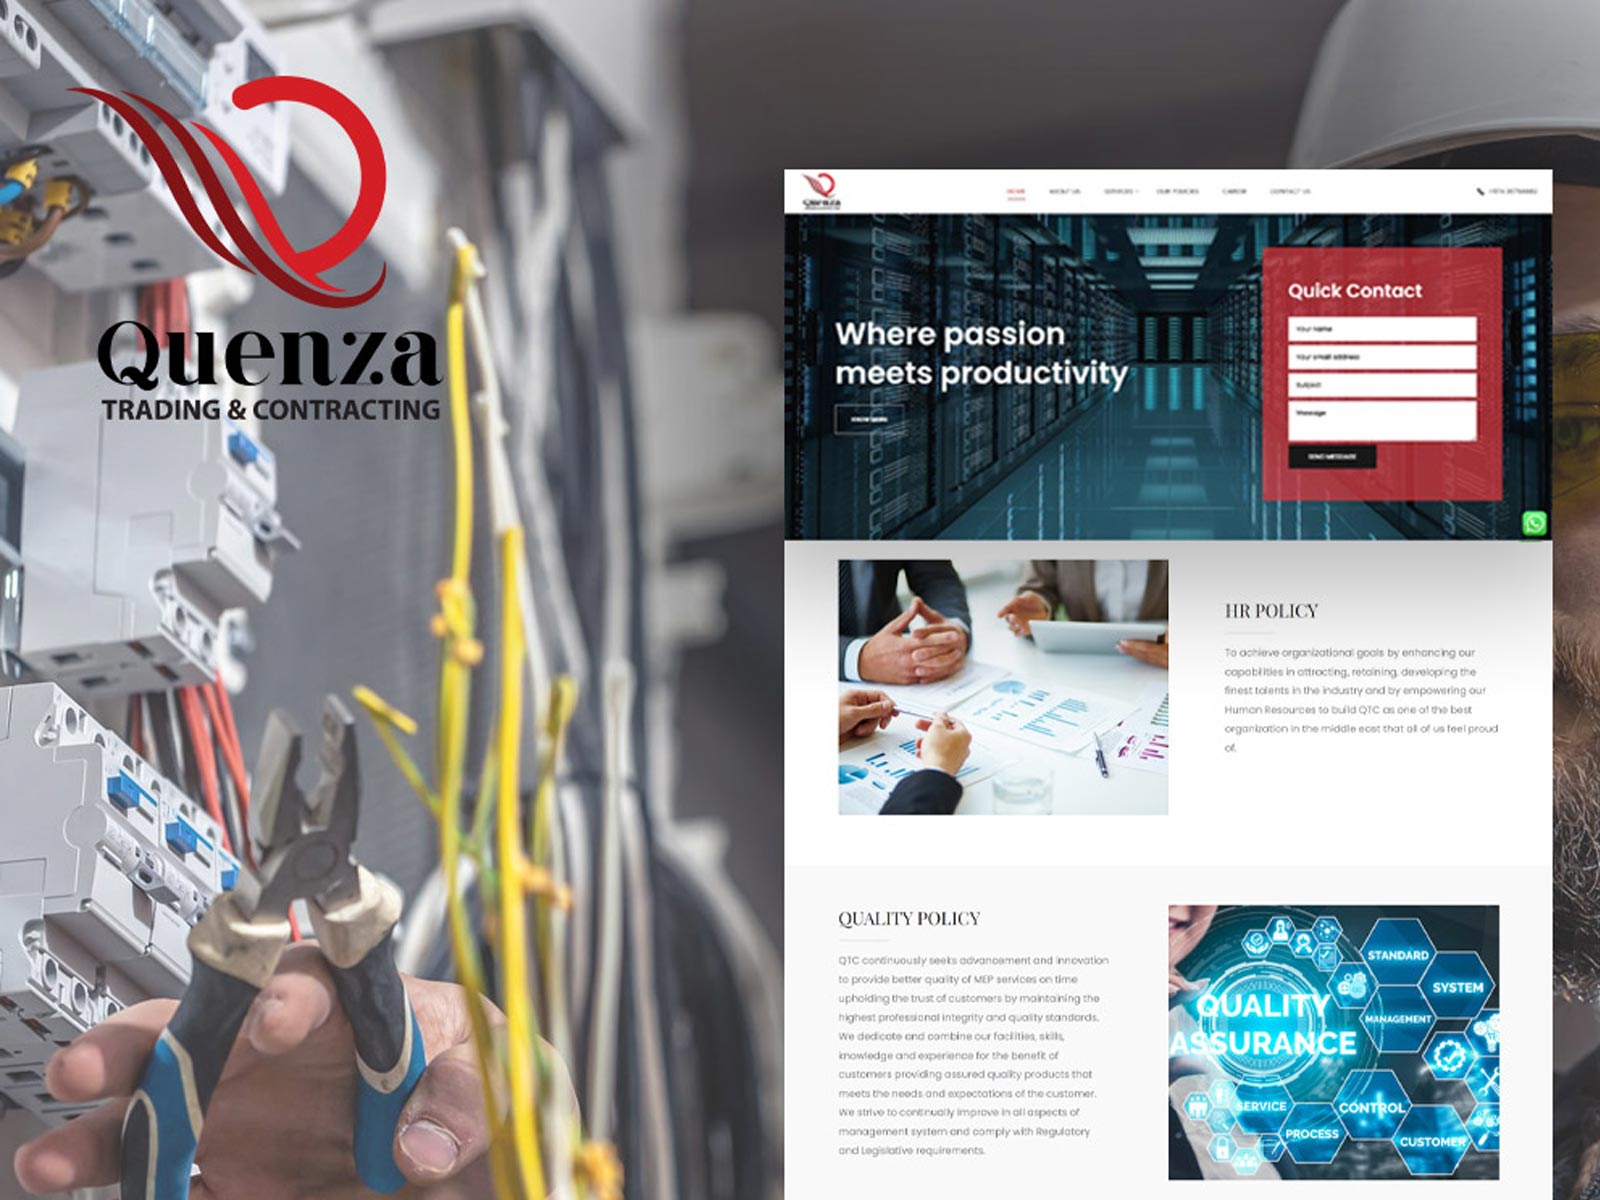 Quenza Trading and Contracting